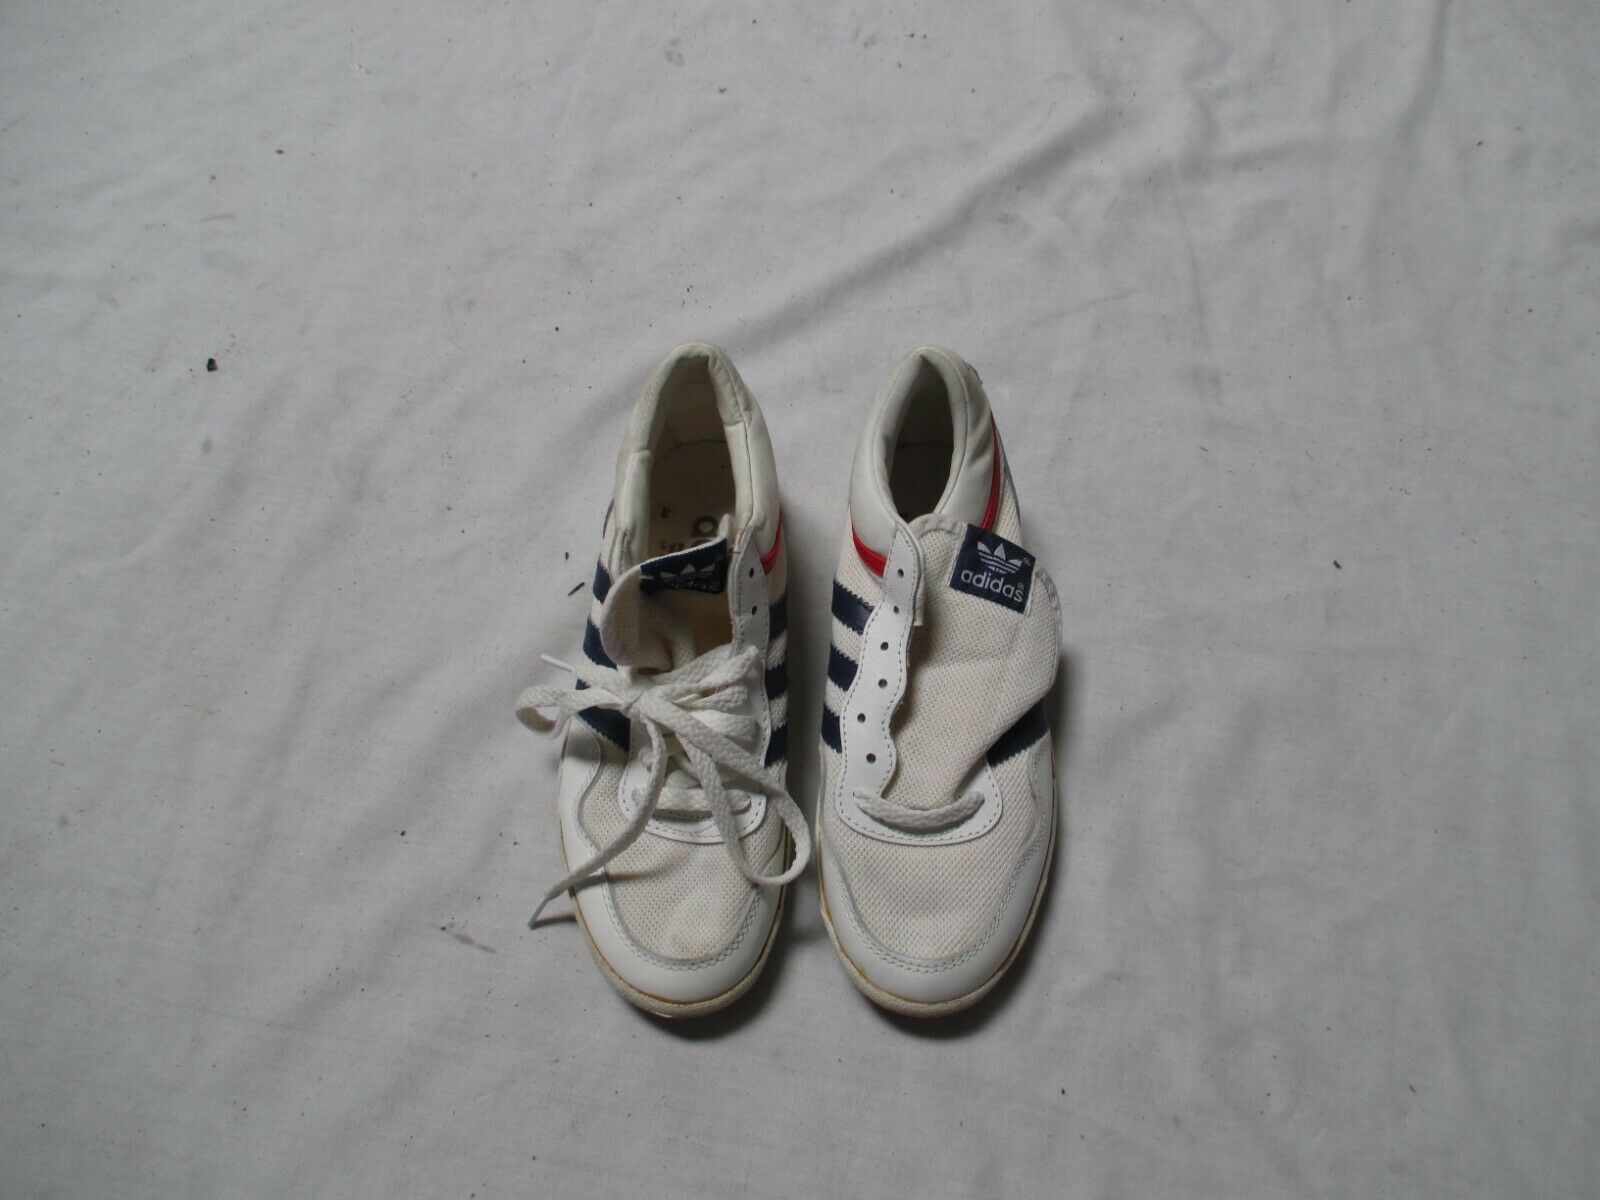 ADIDAS YOUTH  RED/WHITE/BLUE TENNIS SHOE SIZE 3